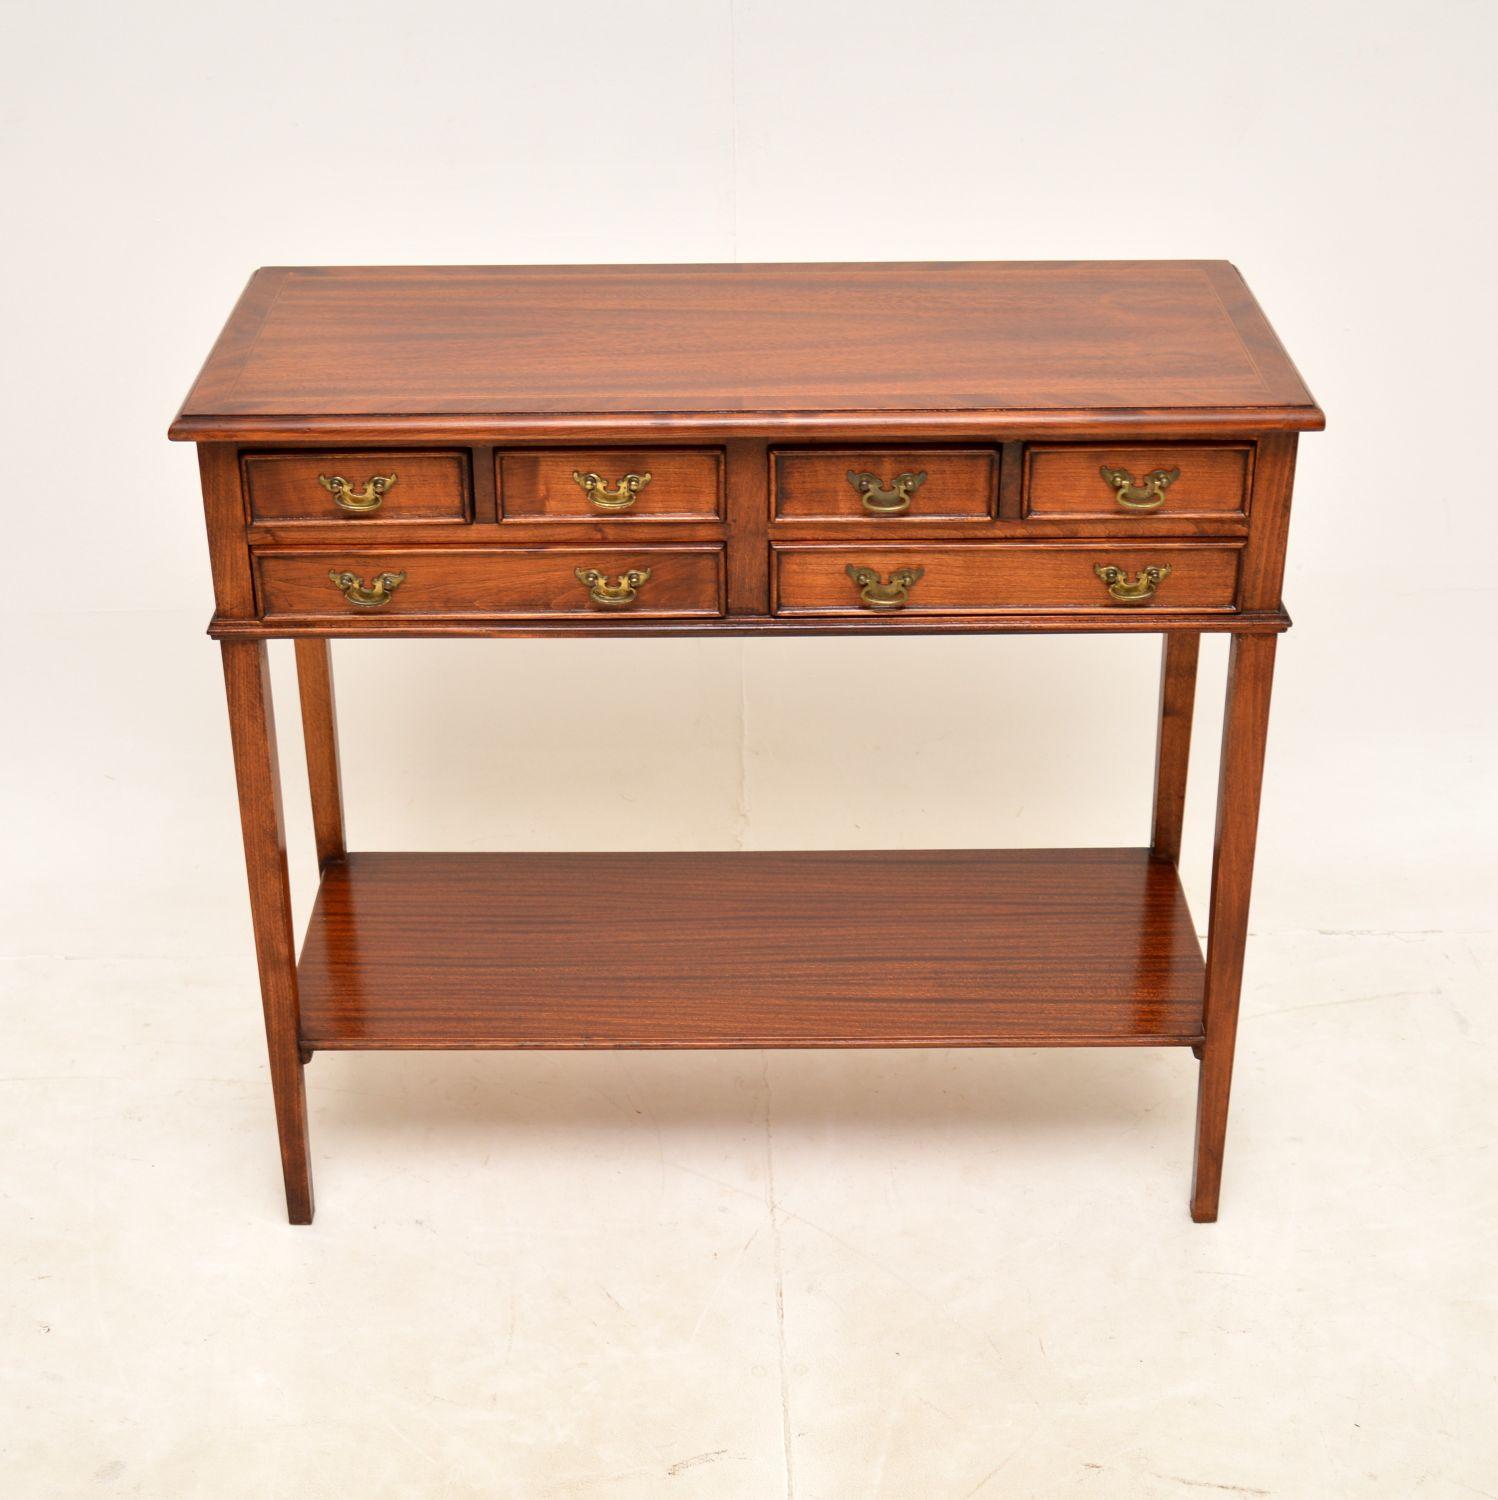 A lovely antique Georgian style console side table, made in England and dating from around the 1960’s.

This is of great quality, it is really well made. There are six slim drawers, a useful lower tier, this has a cross banded top and a polished